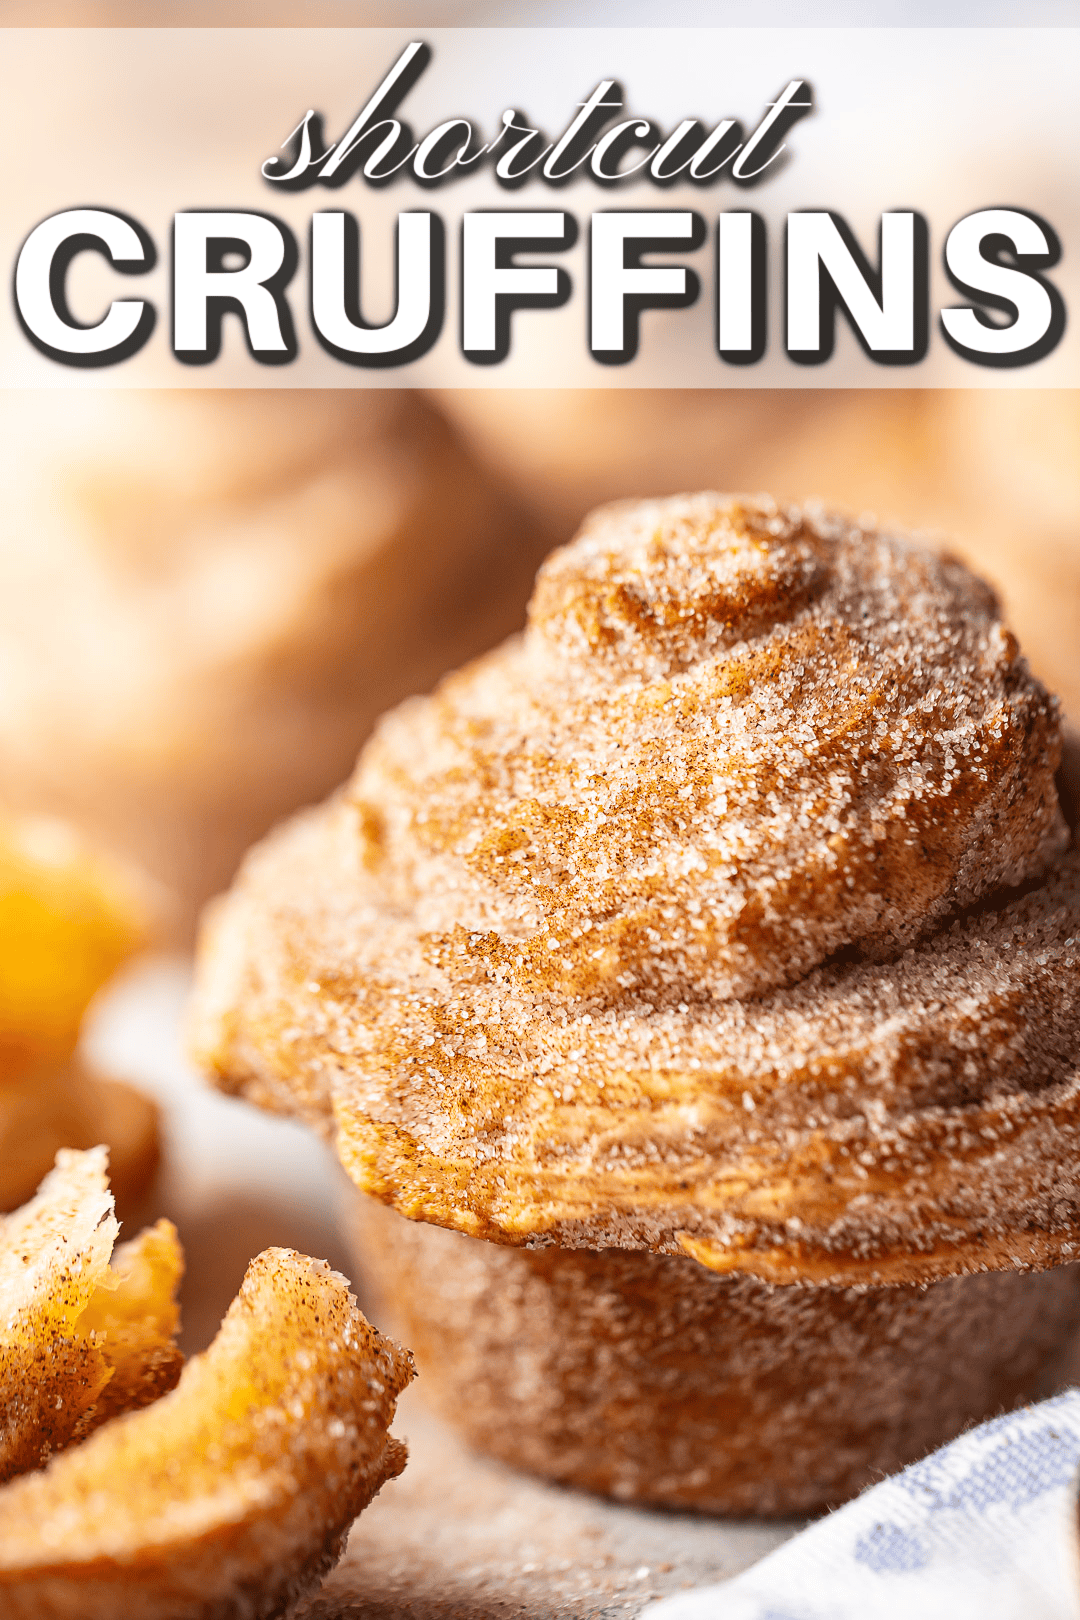 Cruffins made with simplified croissant dough recipe.